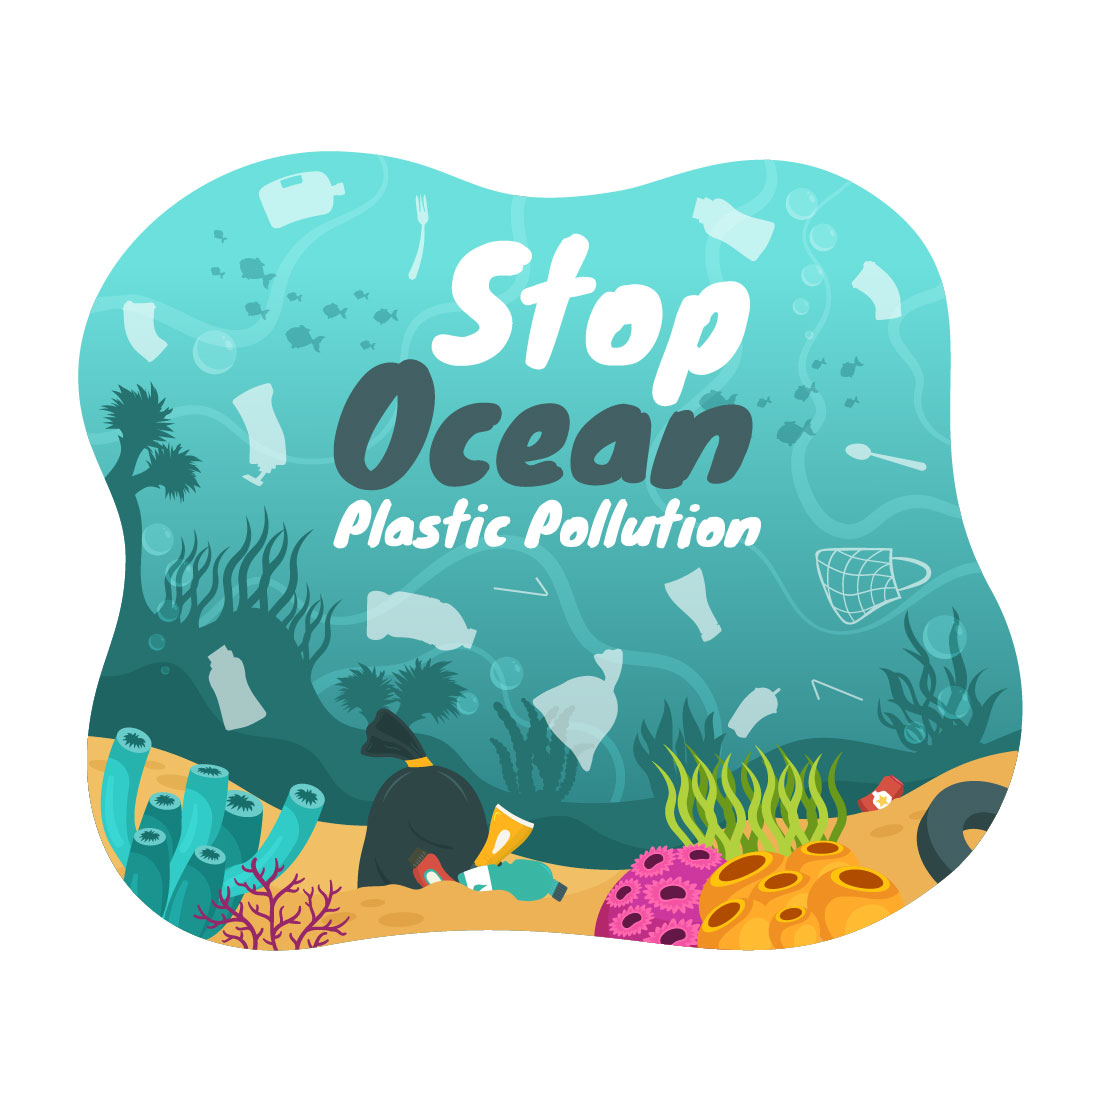 14 Stop Ocean Plastic Pollution Illustration cover image.